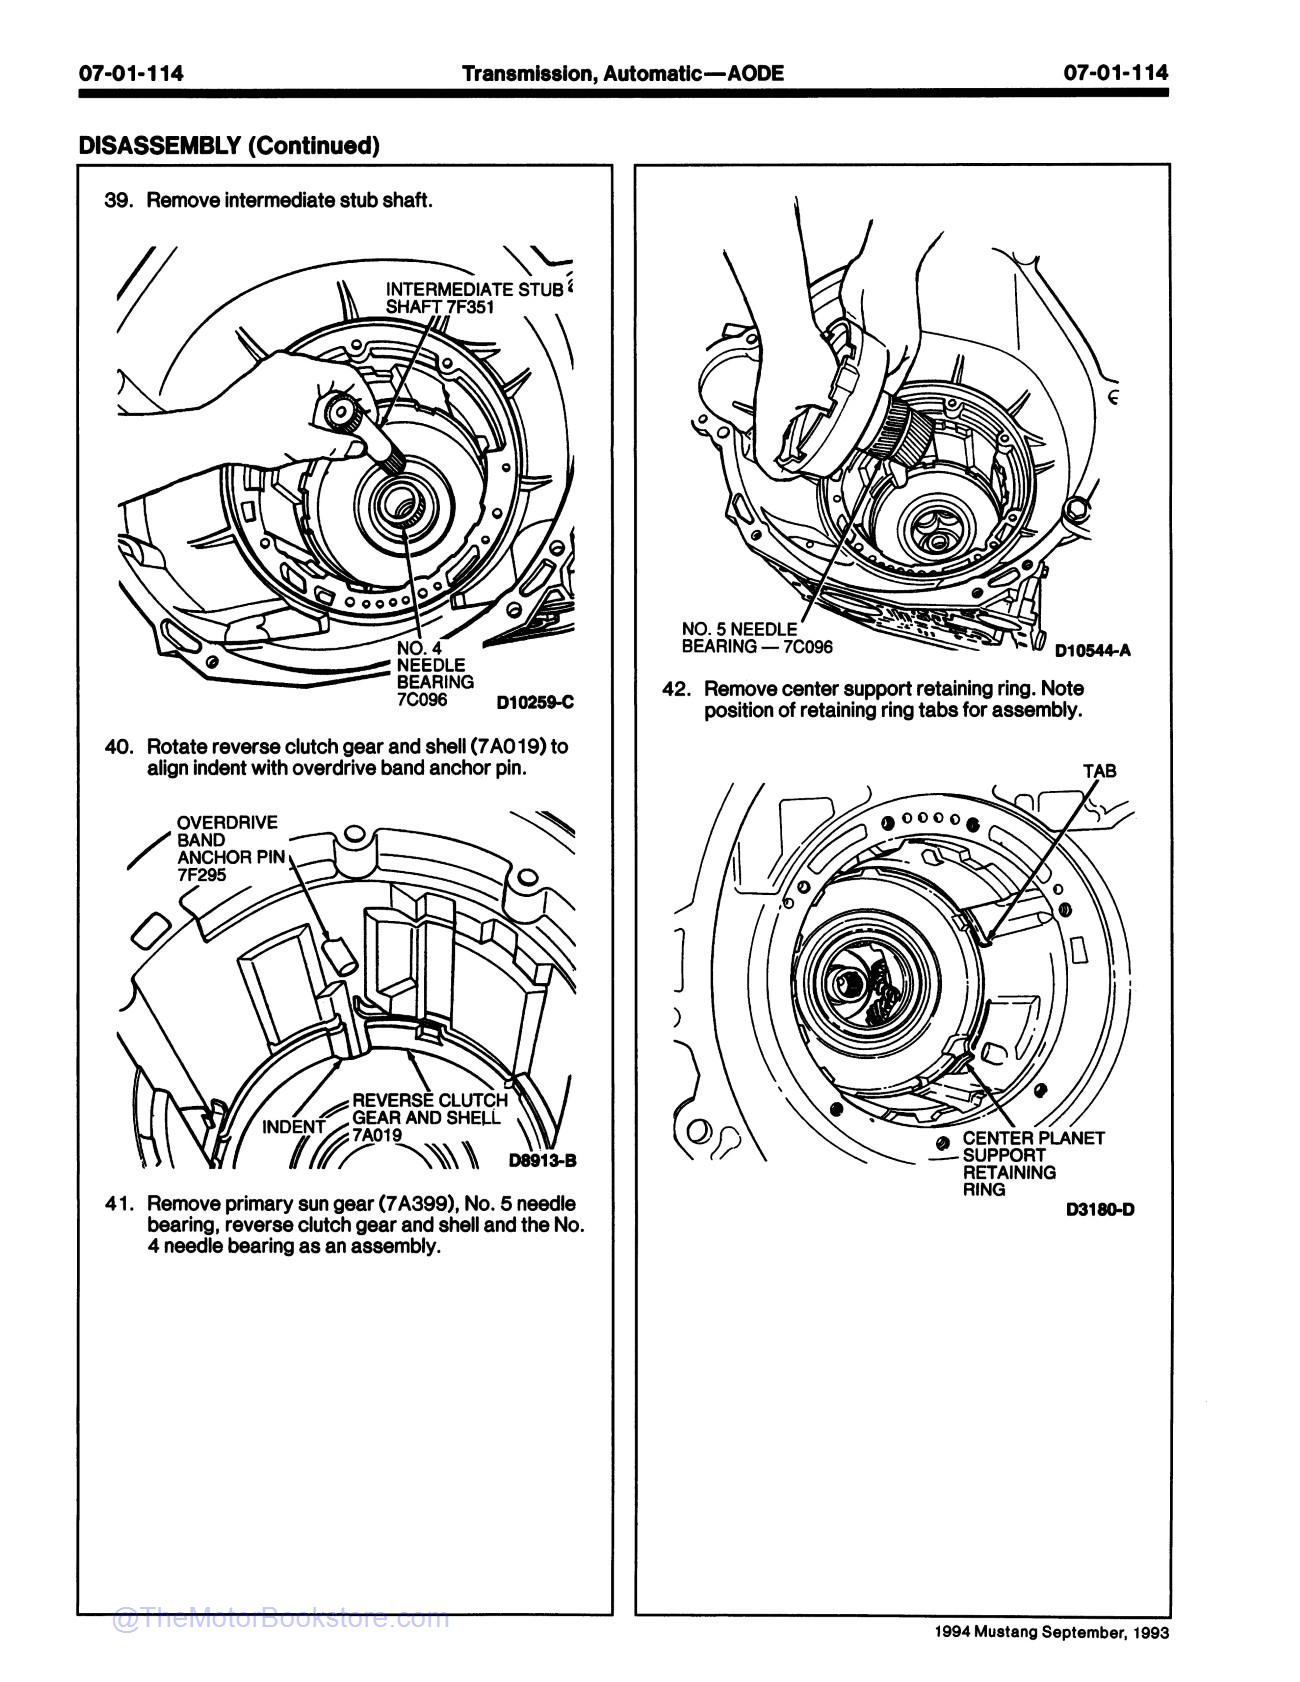 1994 Ford Mustang Service Manual - Sample Page 2